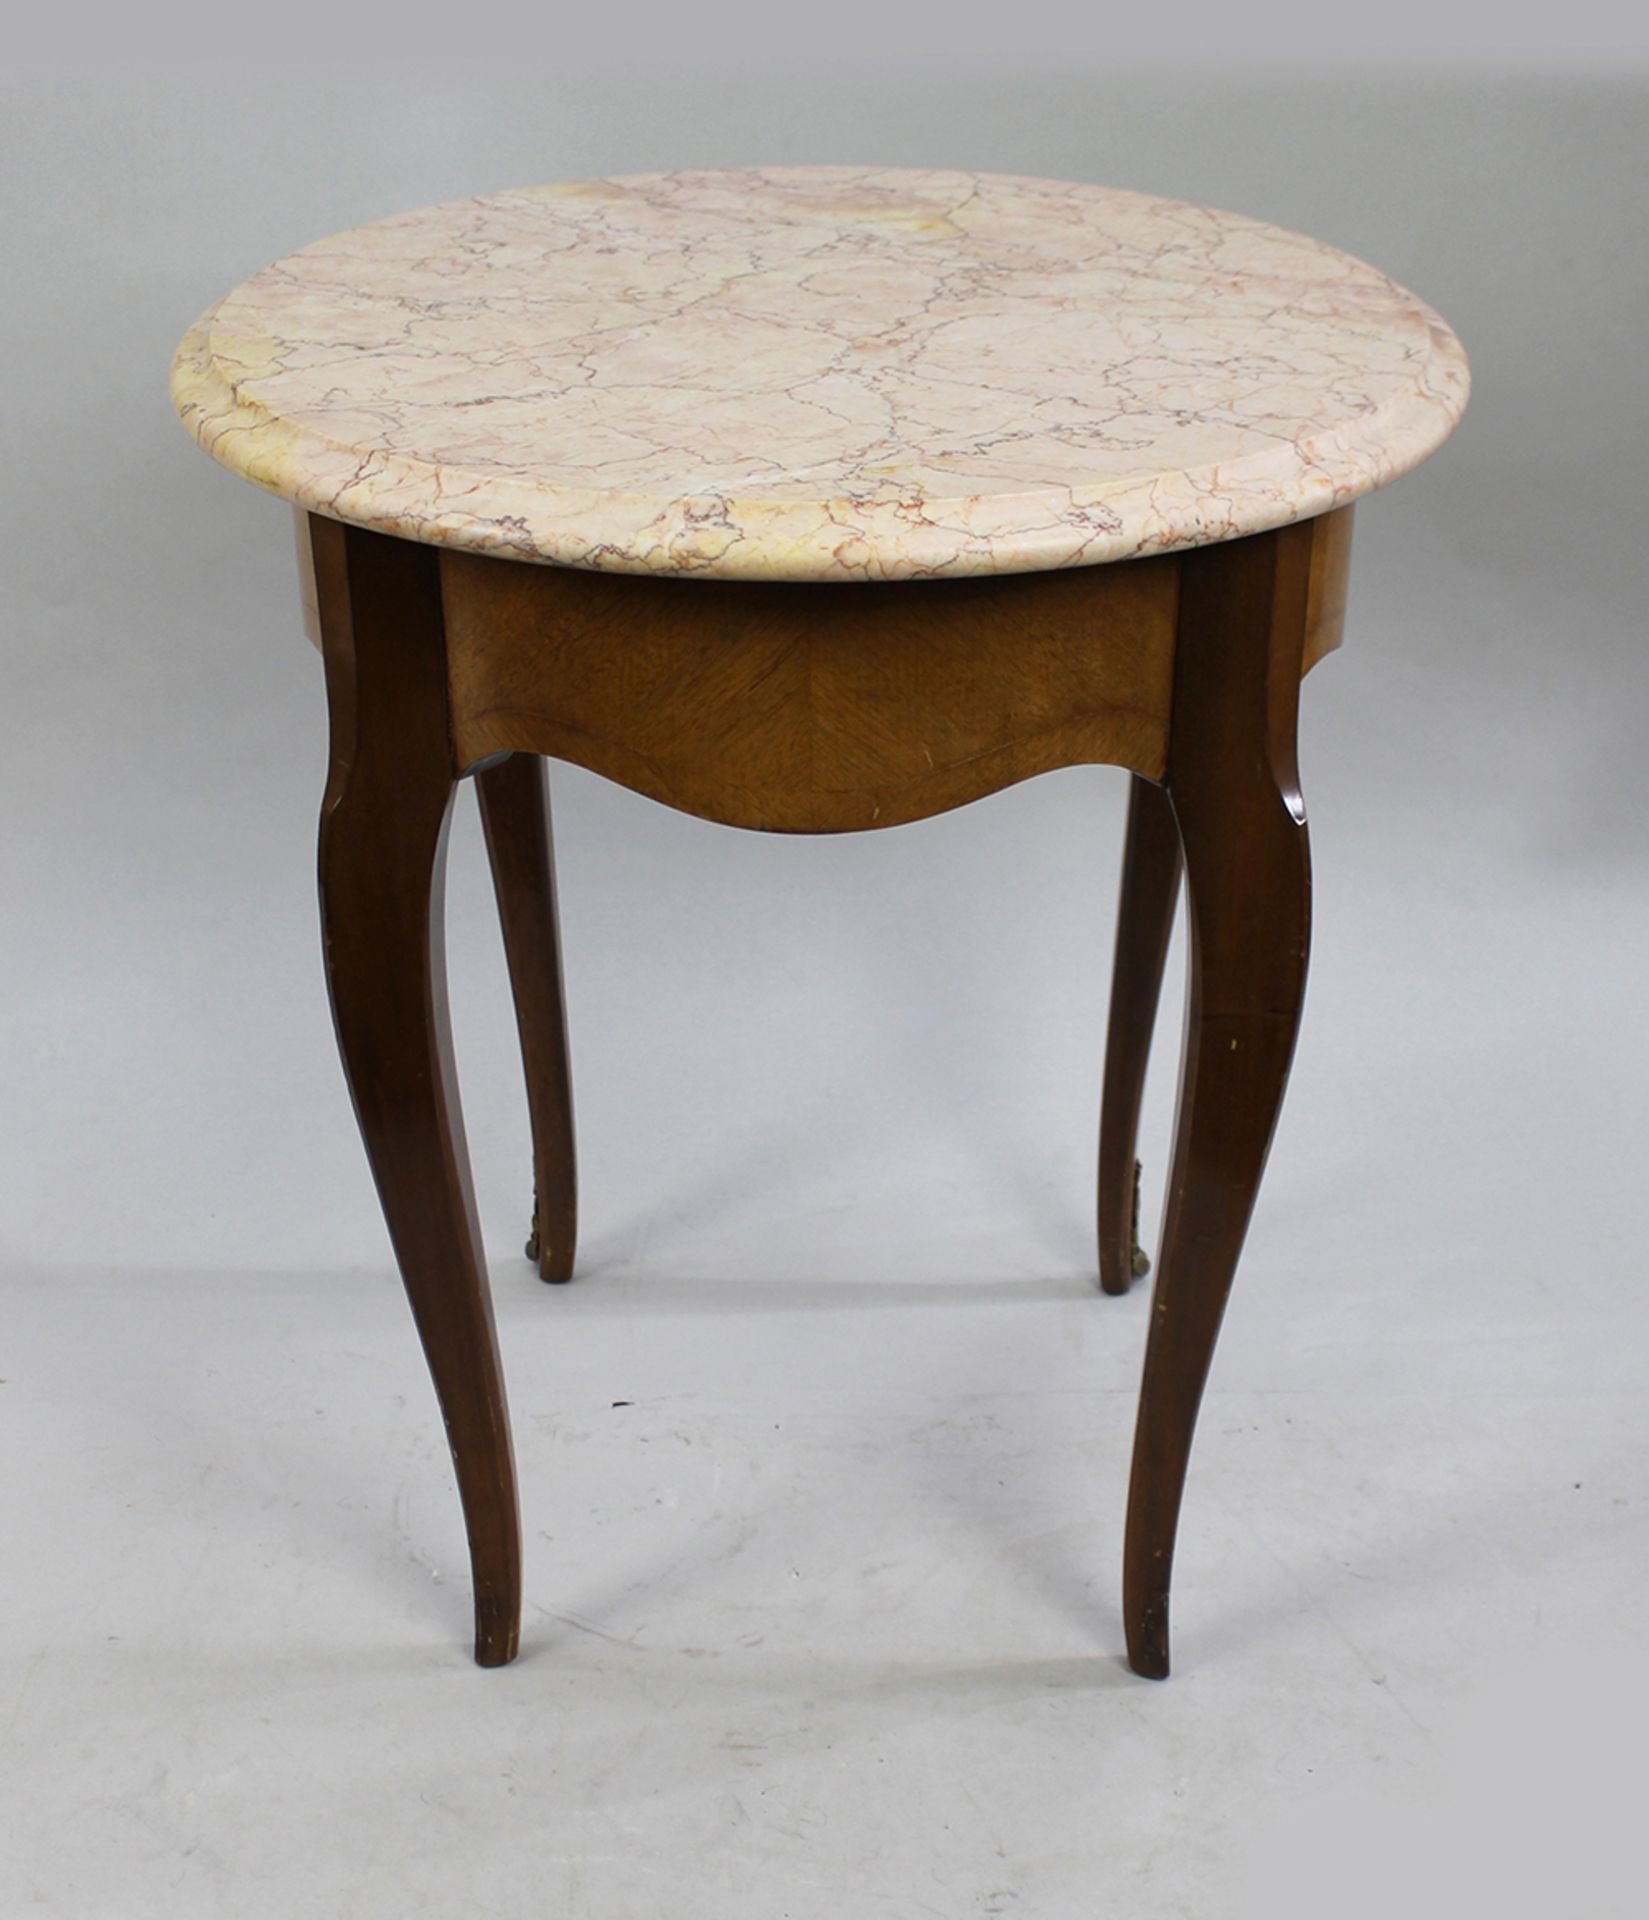 Circular Pink Marble Topped Satinwood Table - Image 6 of 6